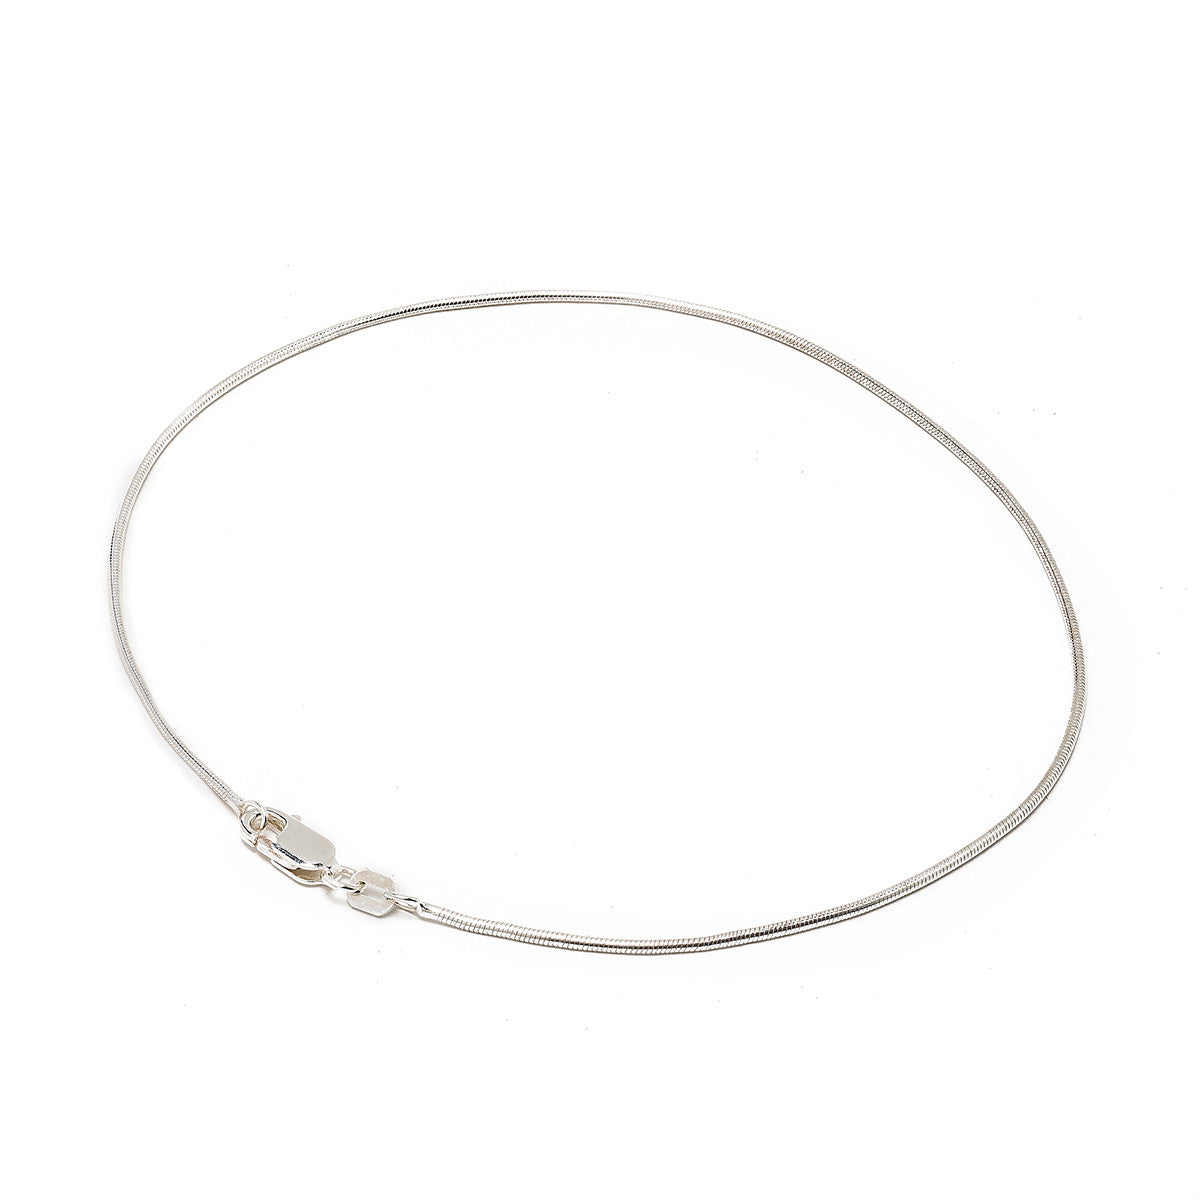 925 sterling silver round Snake anklet chain. Available in 9" and 10". Smooth chain.